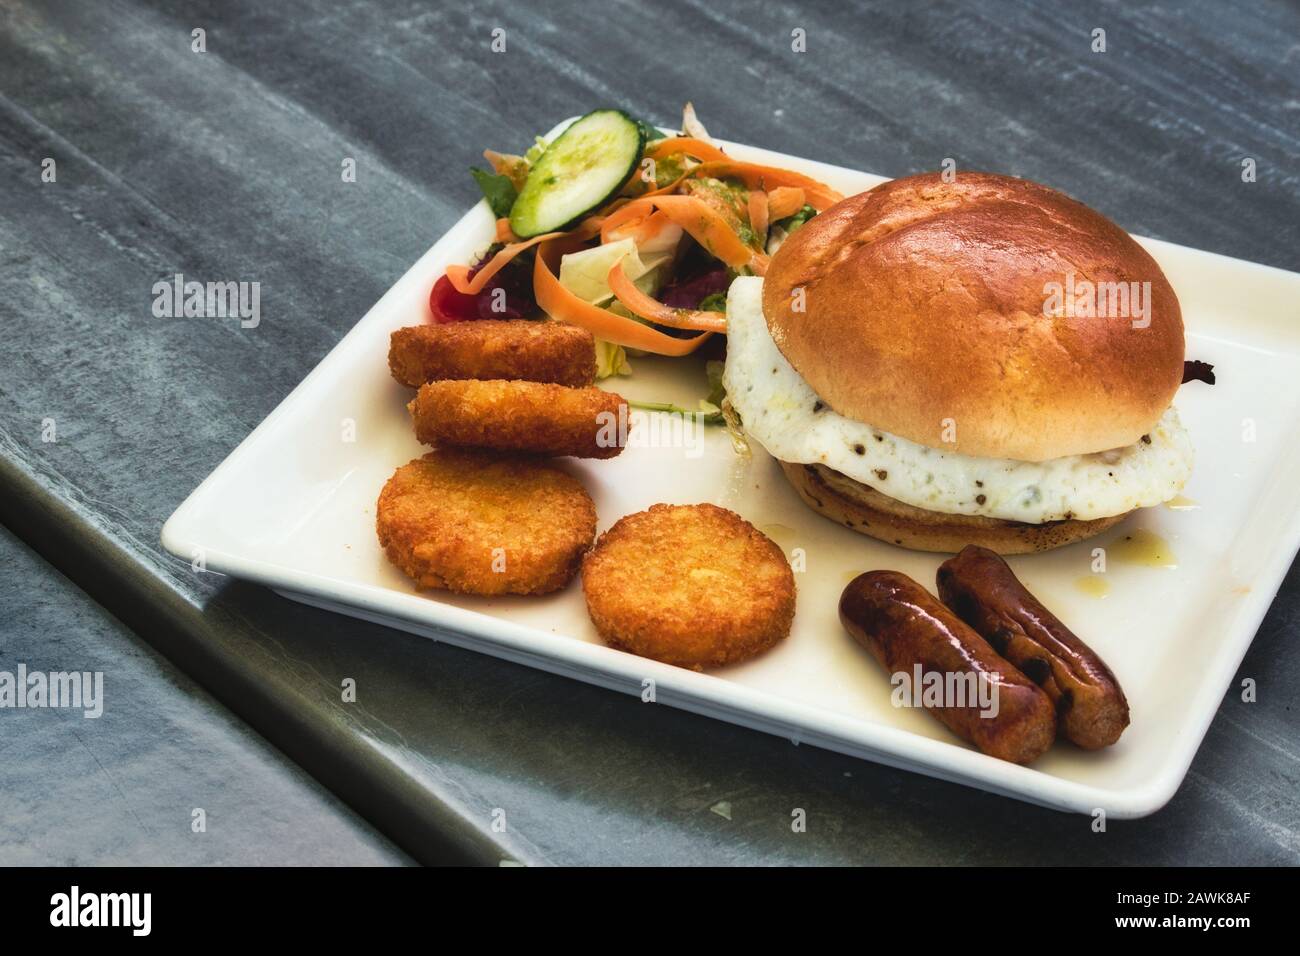 Breakfast brioche with fried egg, sausages, hash browns and salad Stock Photo